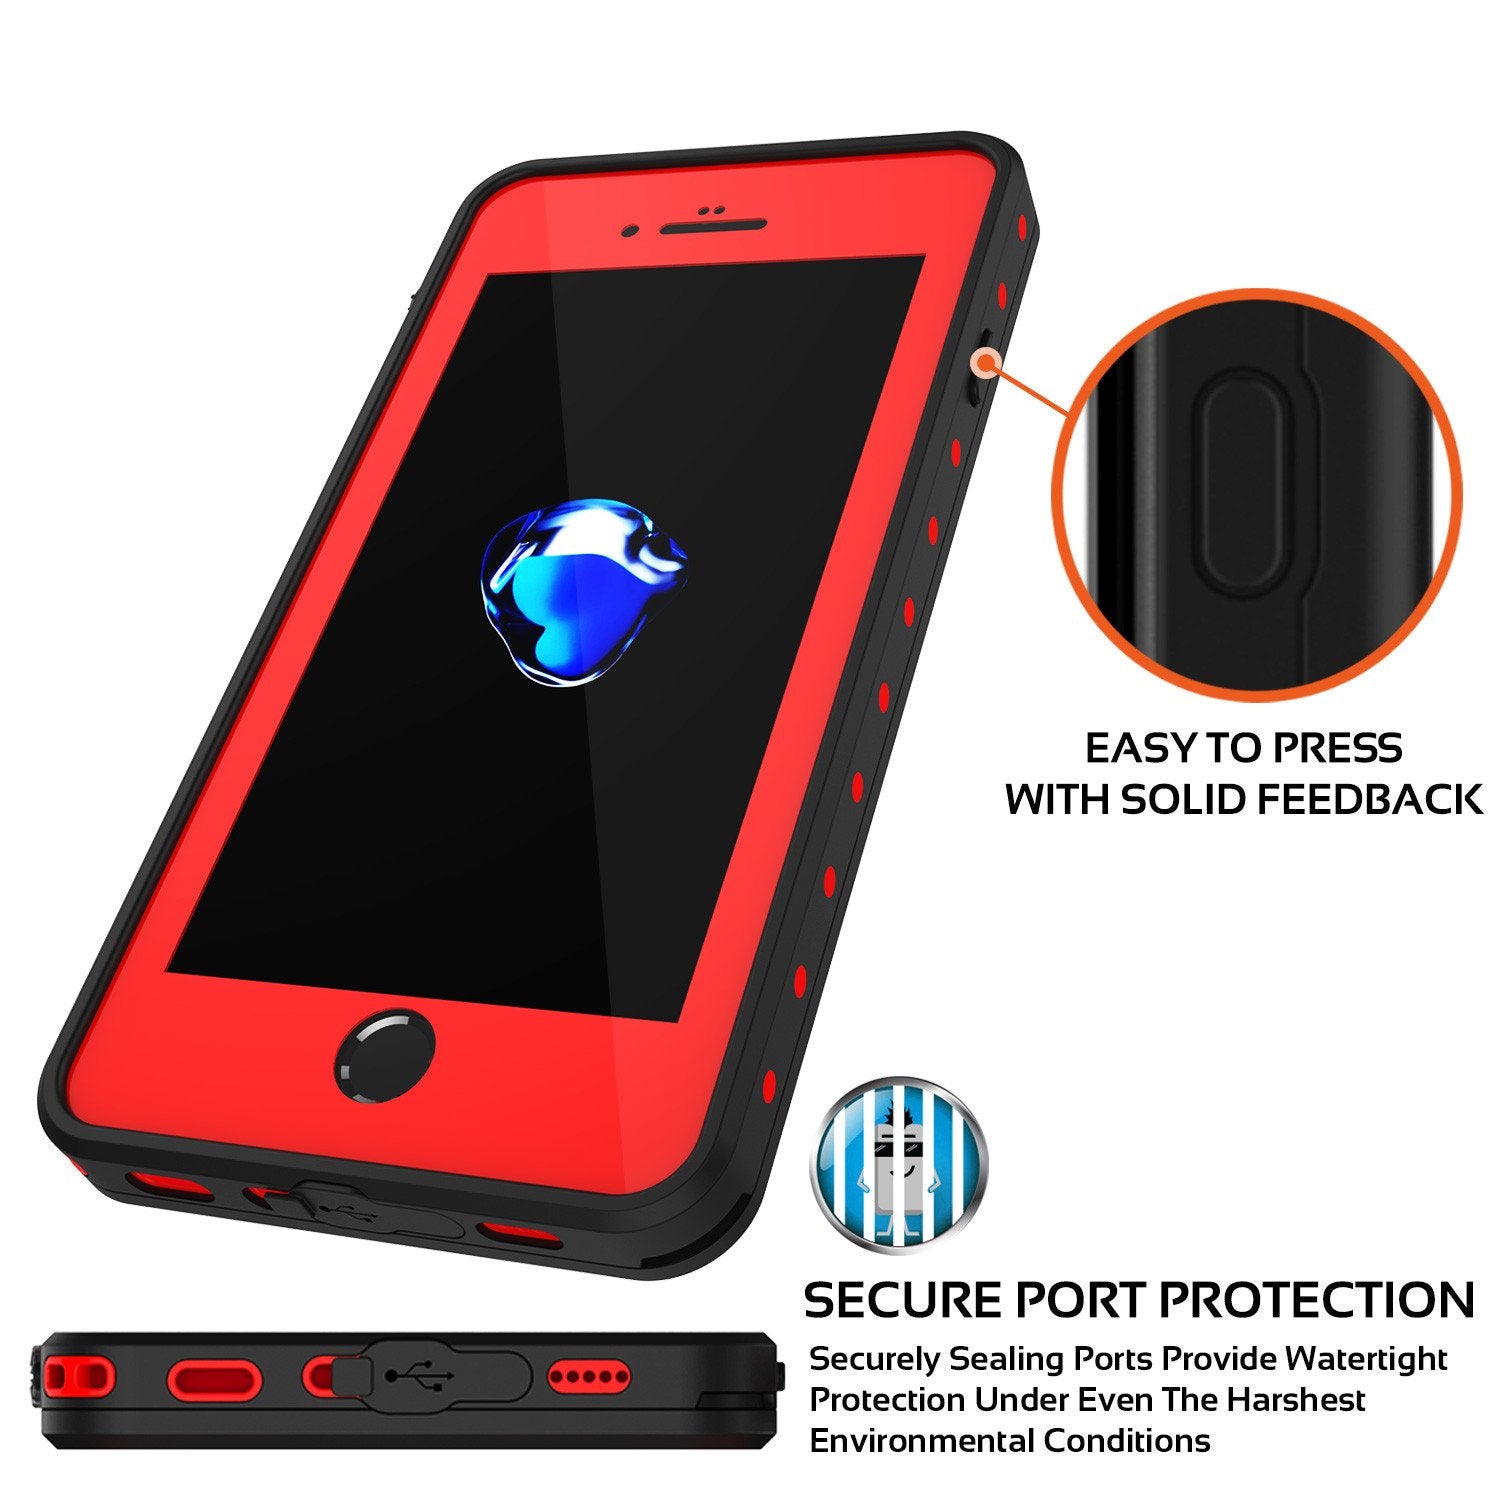 iPhone 7S+/7+ Plus Waterproof Case, PUNKcase StudStar Red Case for